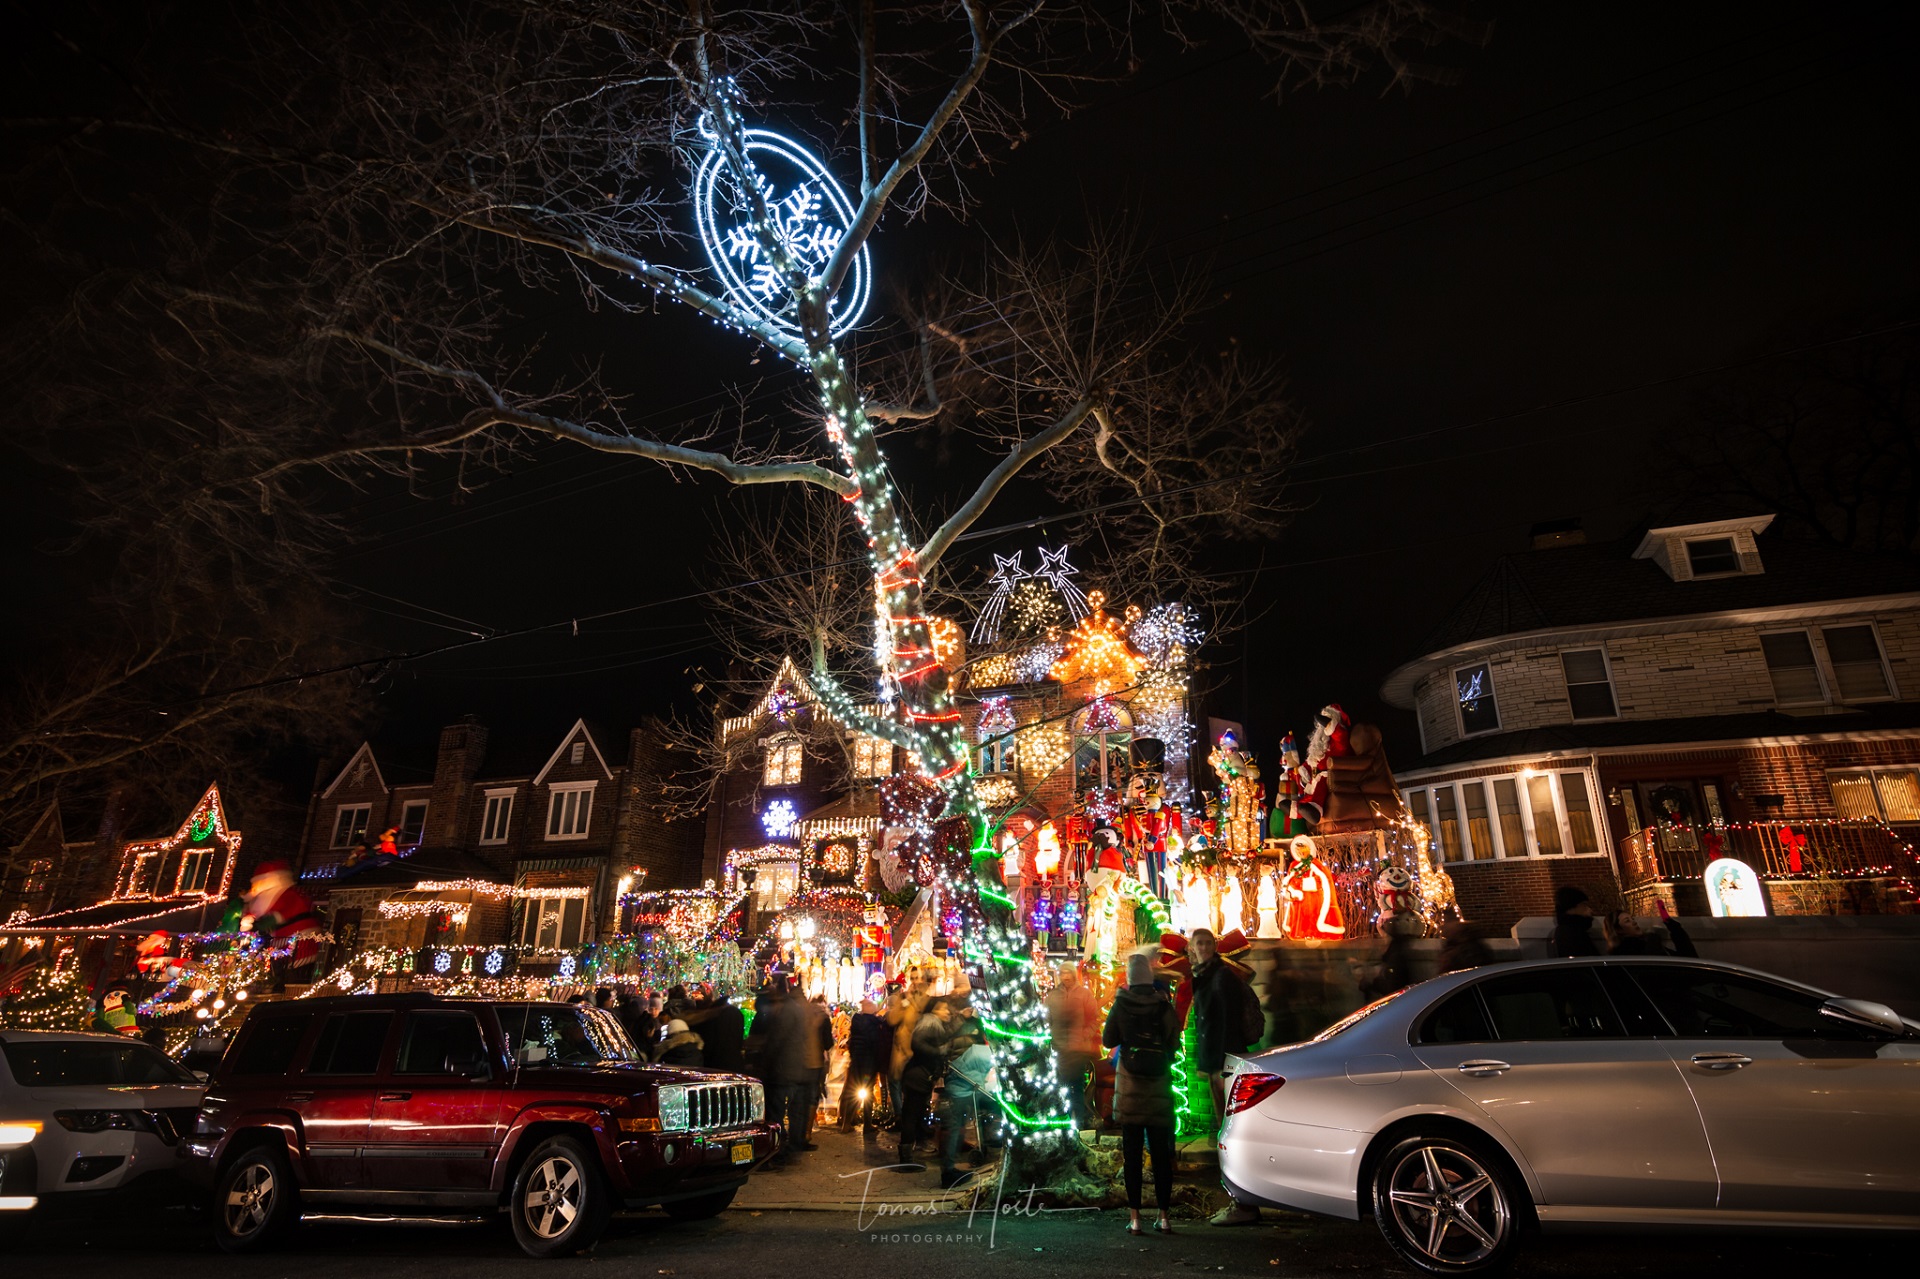 What amazing things can be explored in Dyker Heights Christmas Lights?